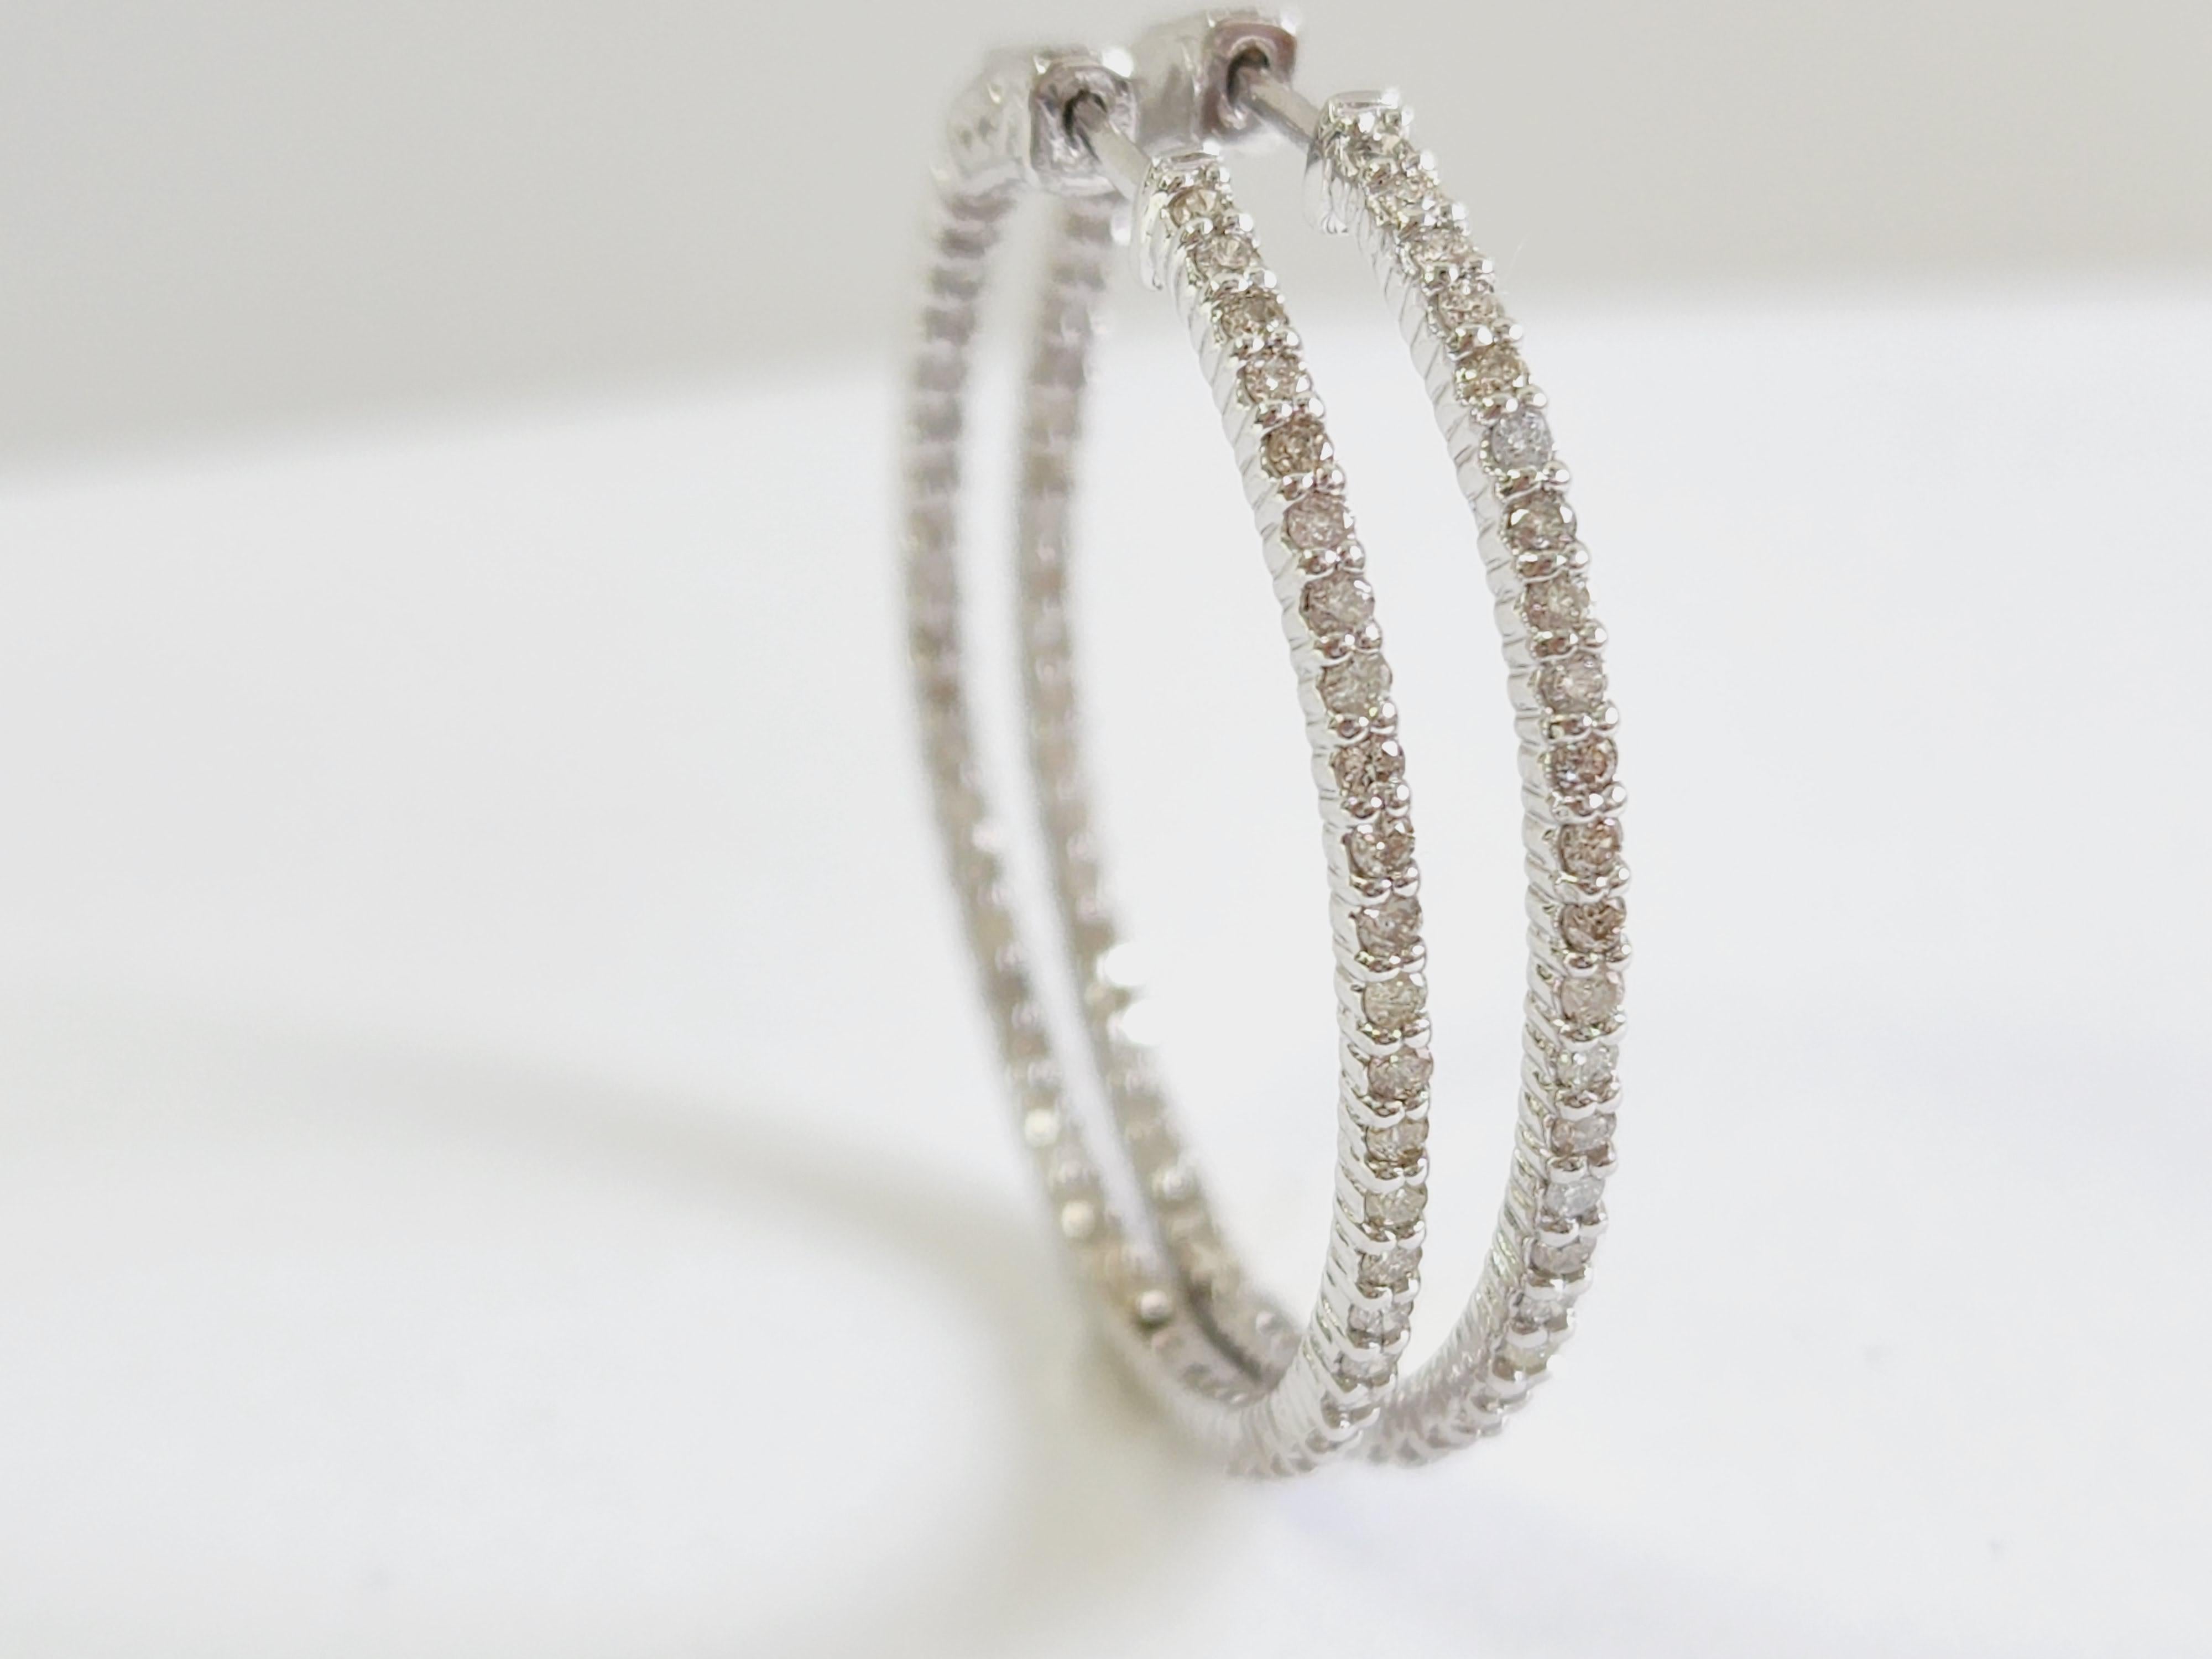 Beautiful pair of diamond inside out hoop earrings in 14k white gold. Secures with snap closure for wear.  
Measures 1.25 inch x 1.25 inch diameter. 
Average I Color, SI Clarity

*Free shipping within the US